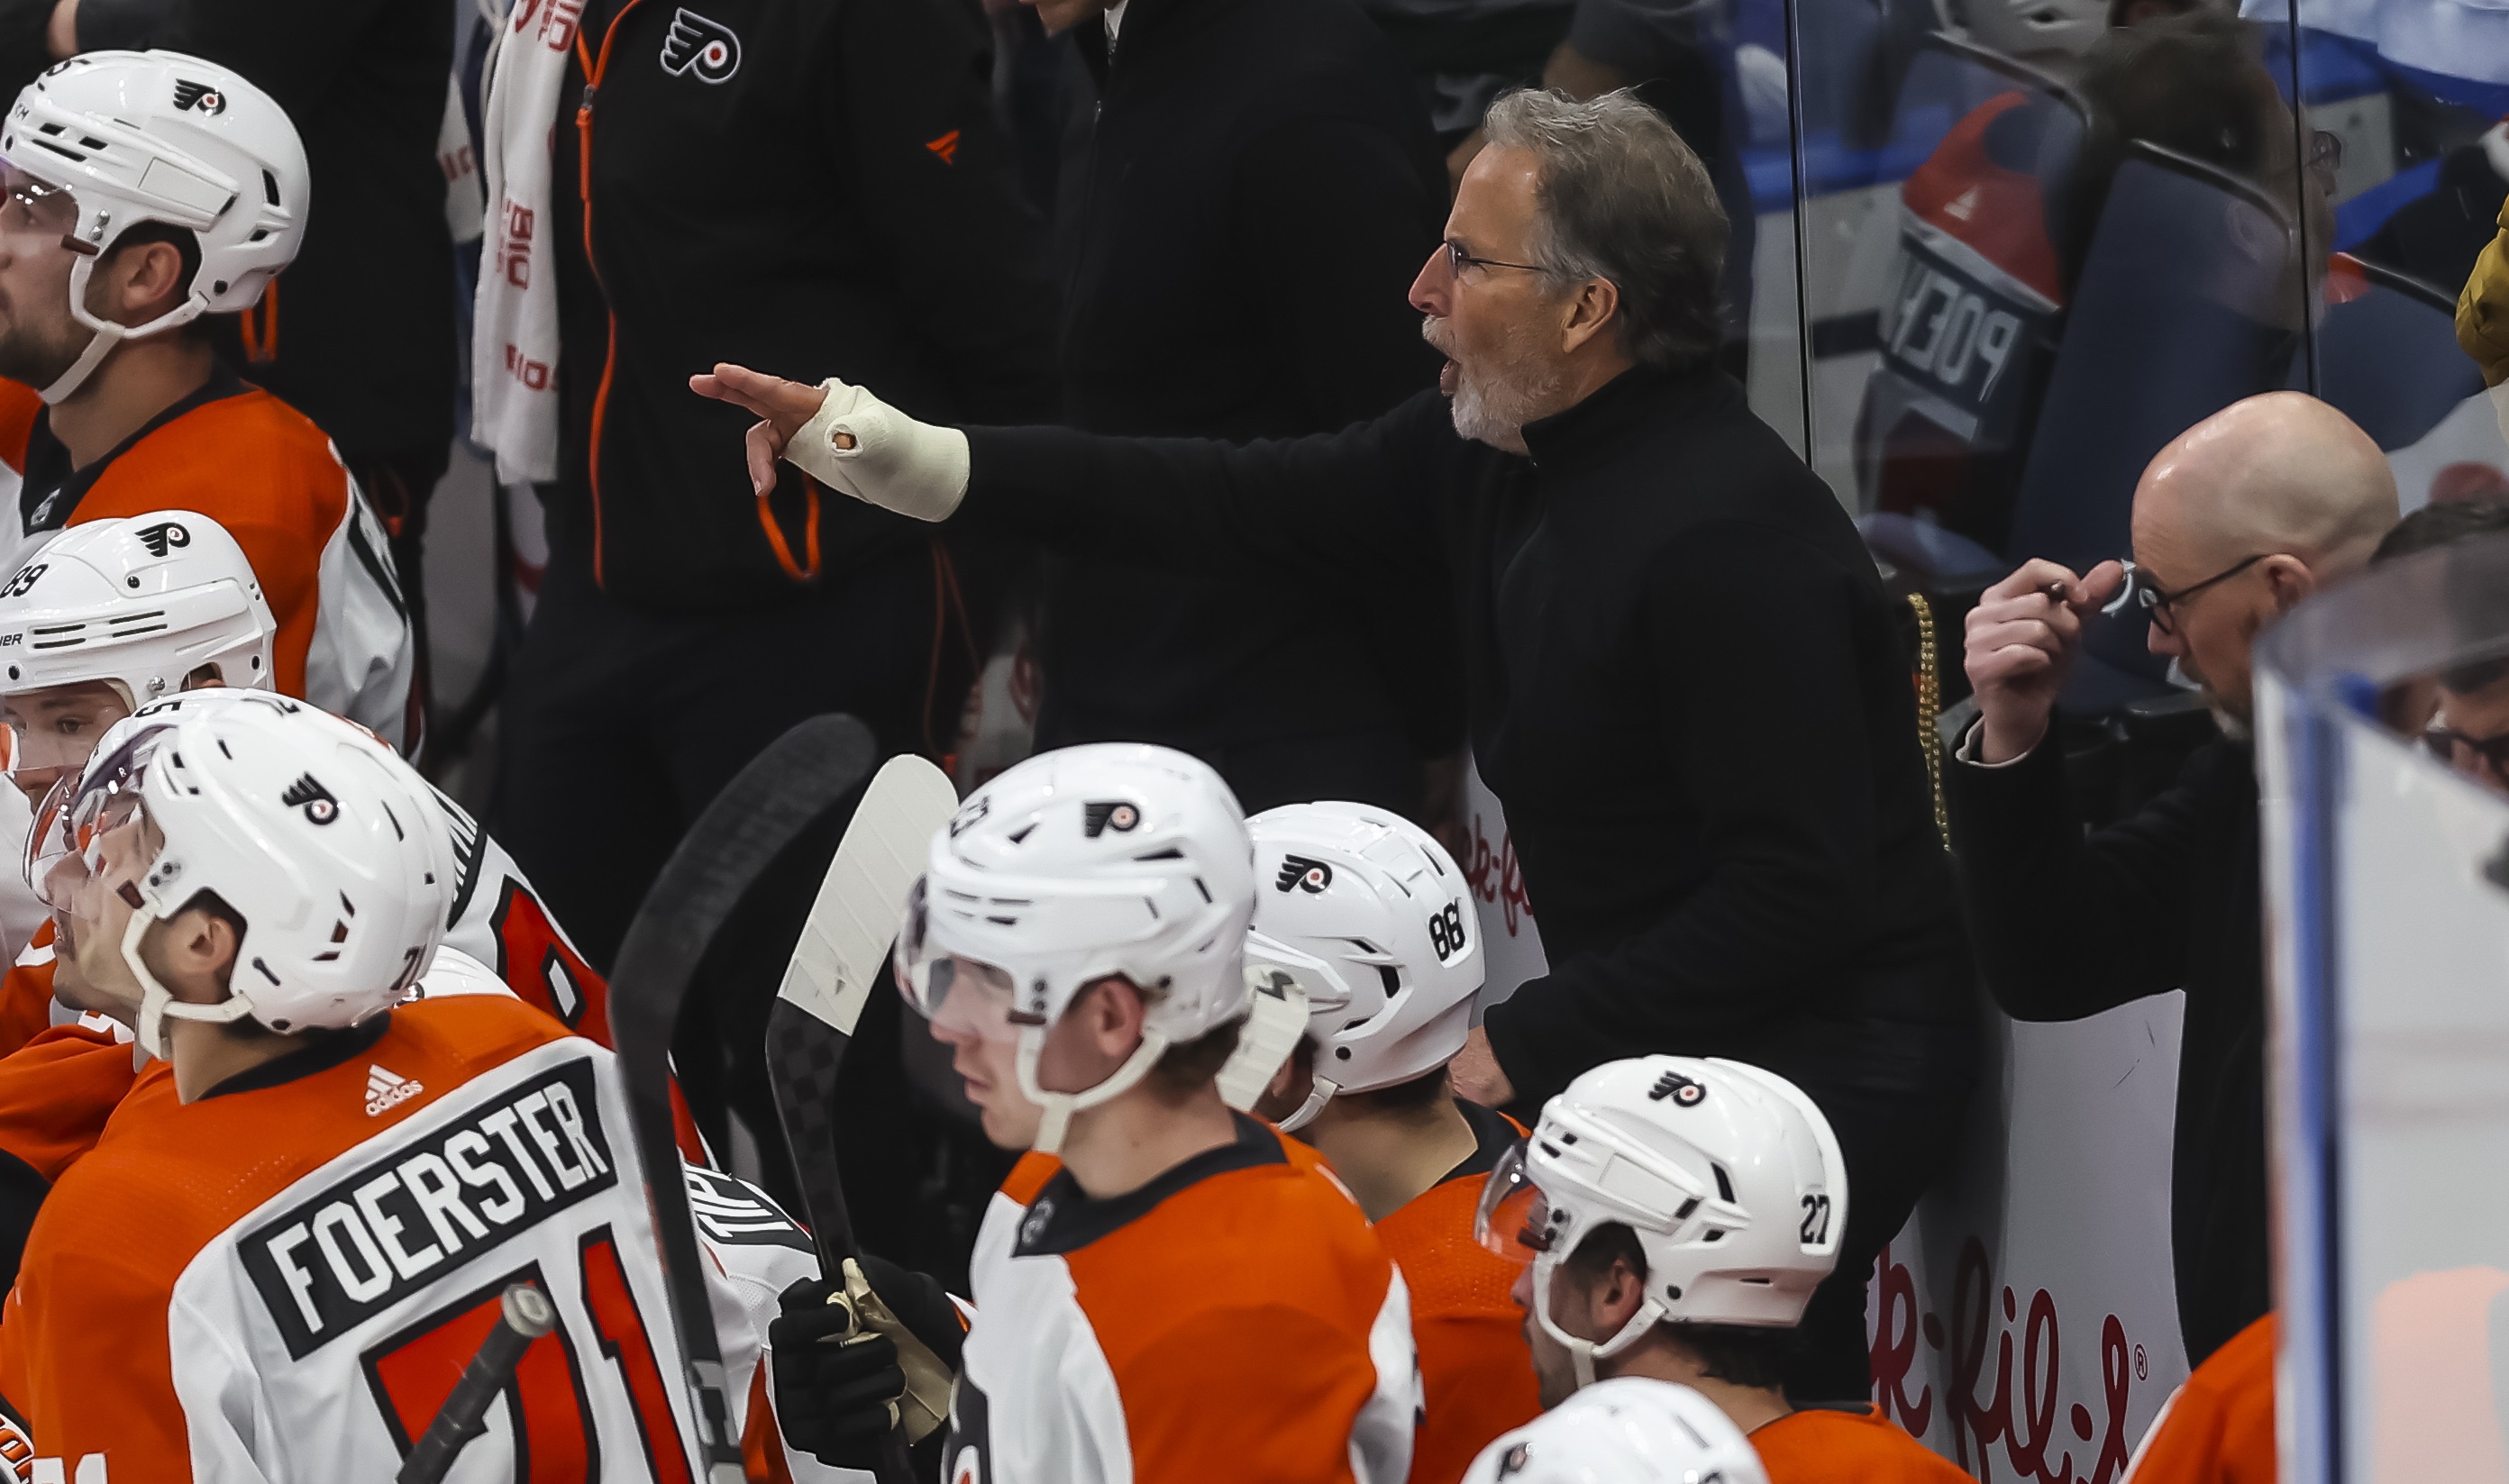 TAMPA, FL - MARCH 9: Head coach John Tortorella of the Philadelphia Flyers reacts to being ejected during the first period against the Tampa Bay Lightning at Amalie Arena on March 9, 2024 in Tampa, Florida. (Photo by Mike Carlson/NHLI via Getty Images)